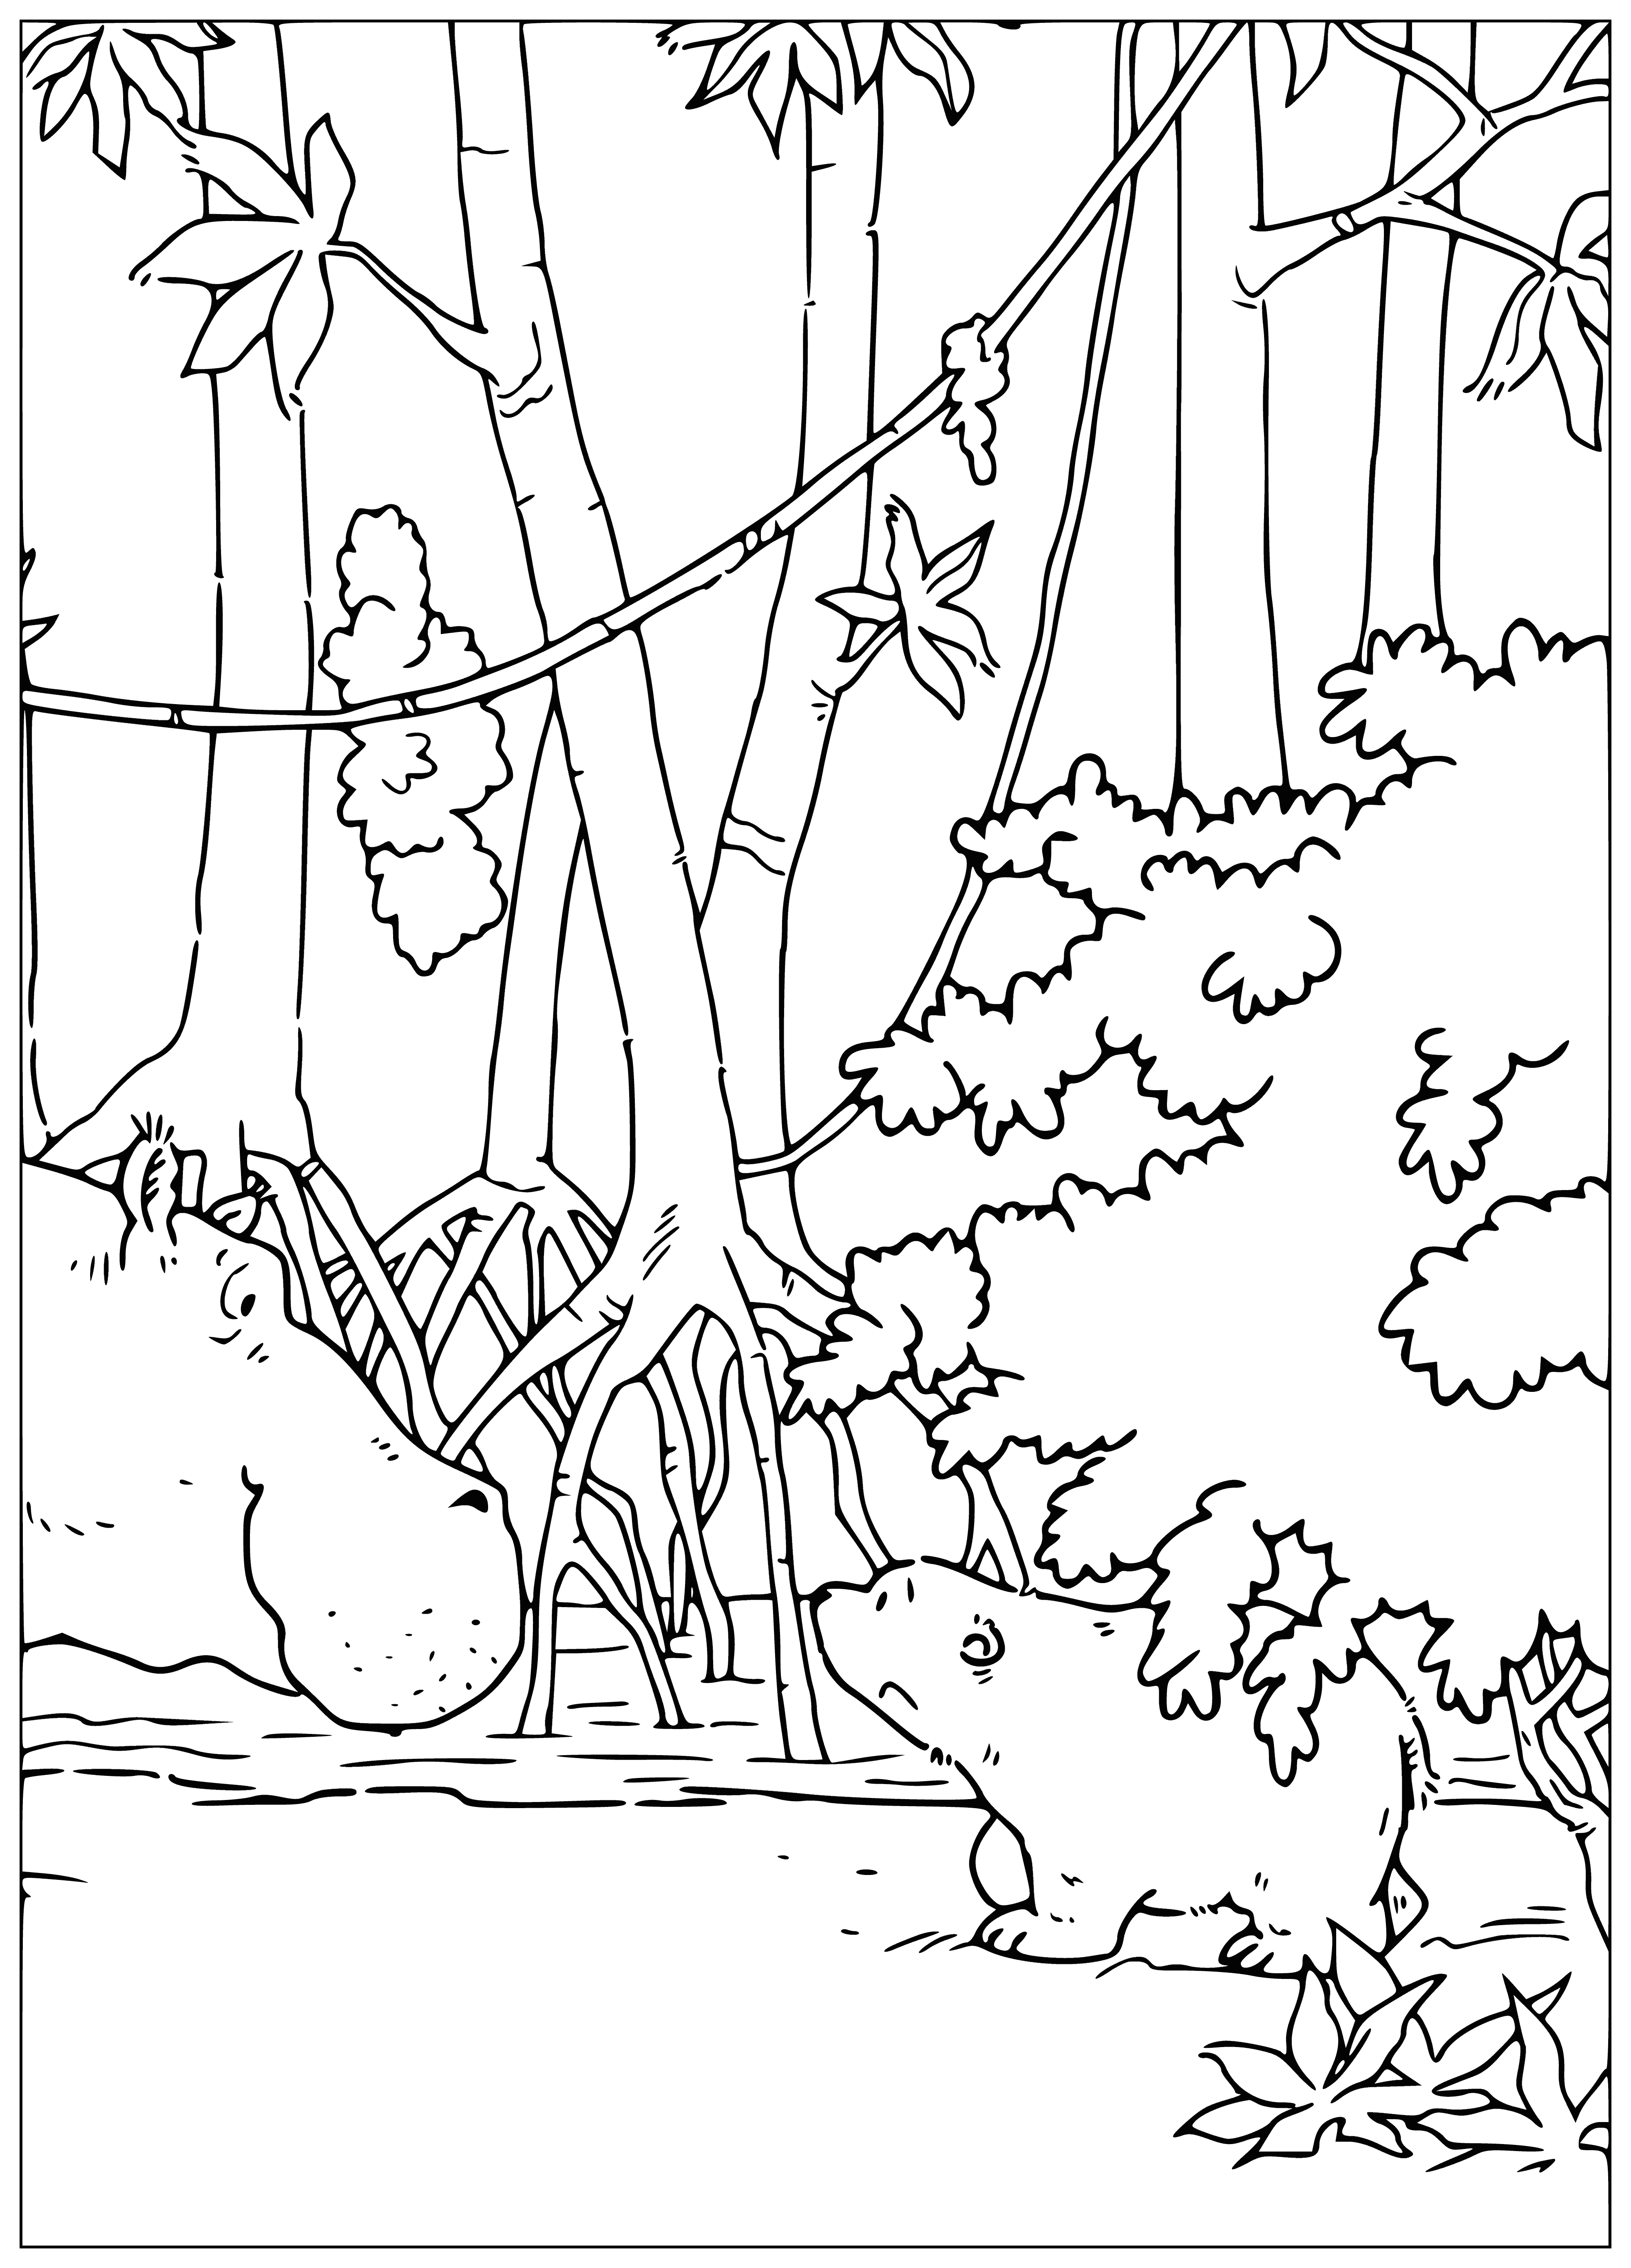 coloring page: Lars & the hippo playing: him (striped shirt & blue pants) w/ red ball, hippo (gray, bow tie & striped shirt) standing, tail curled.